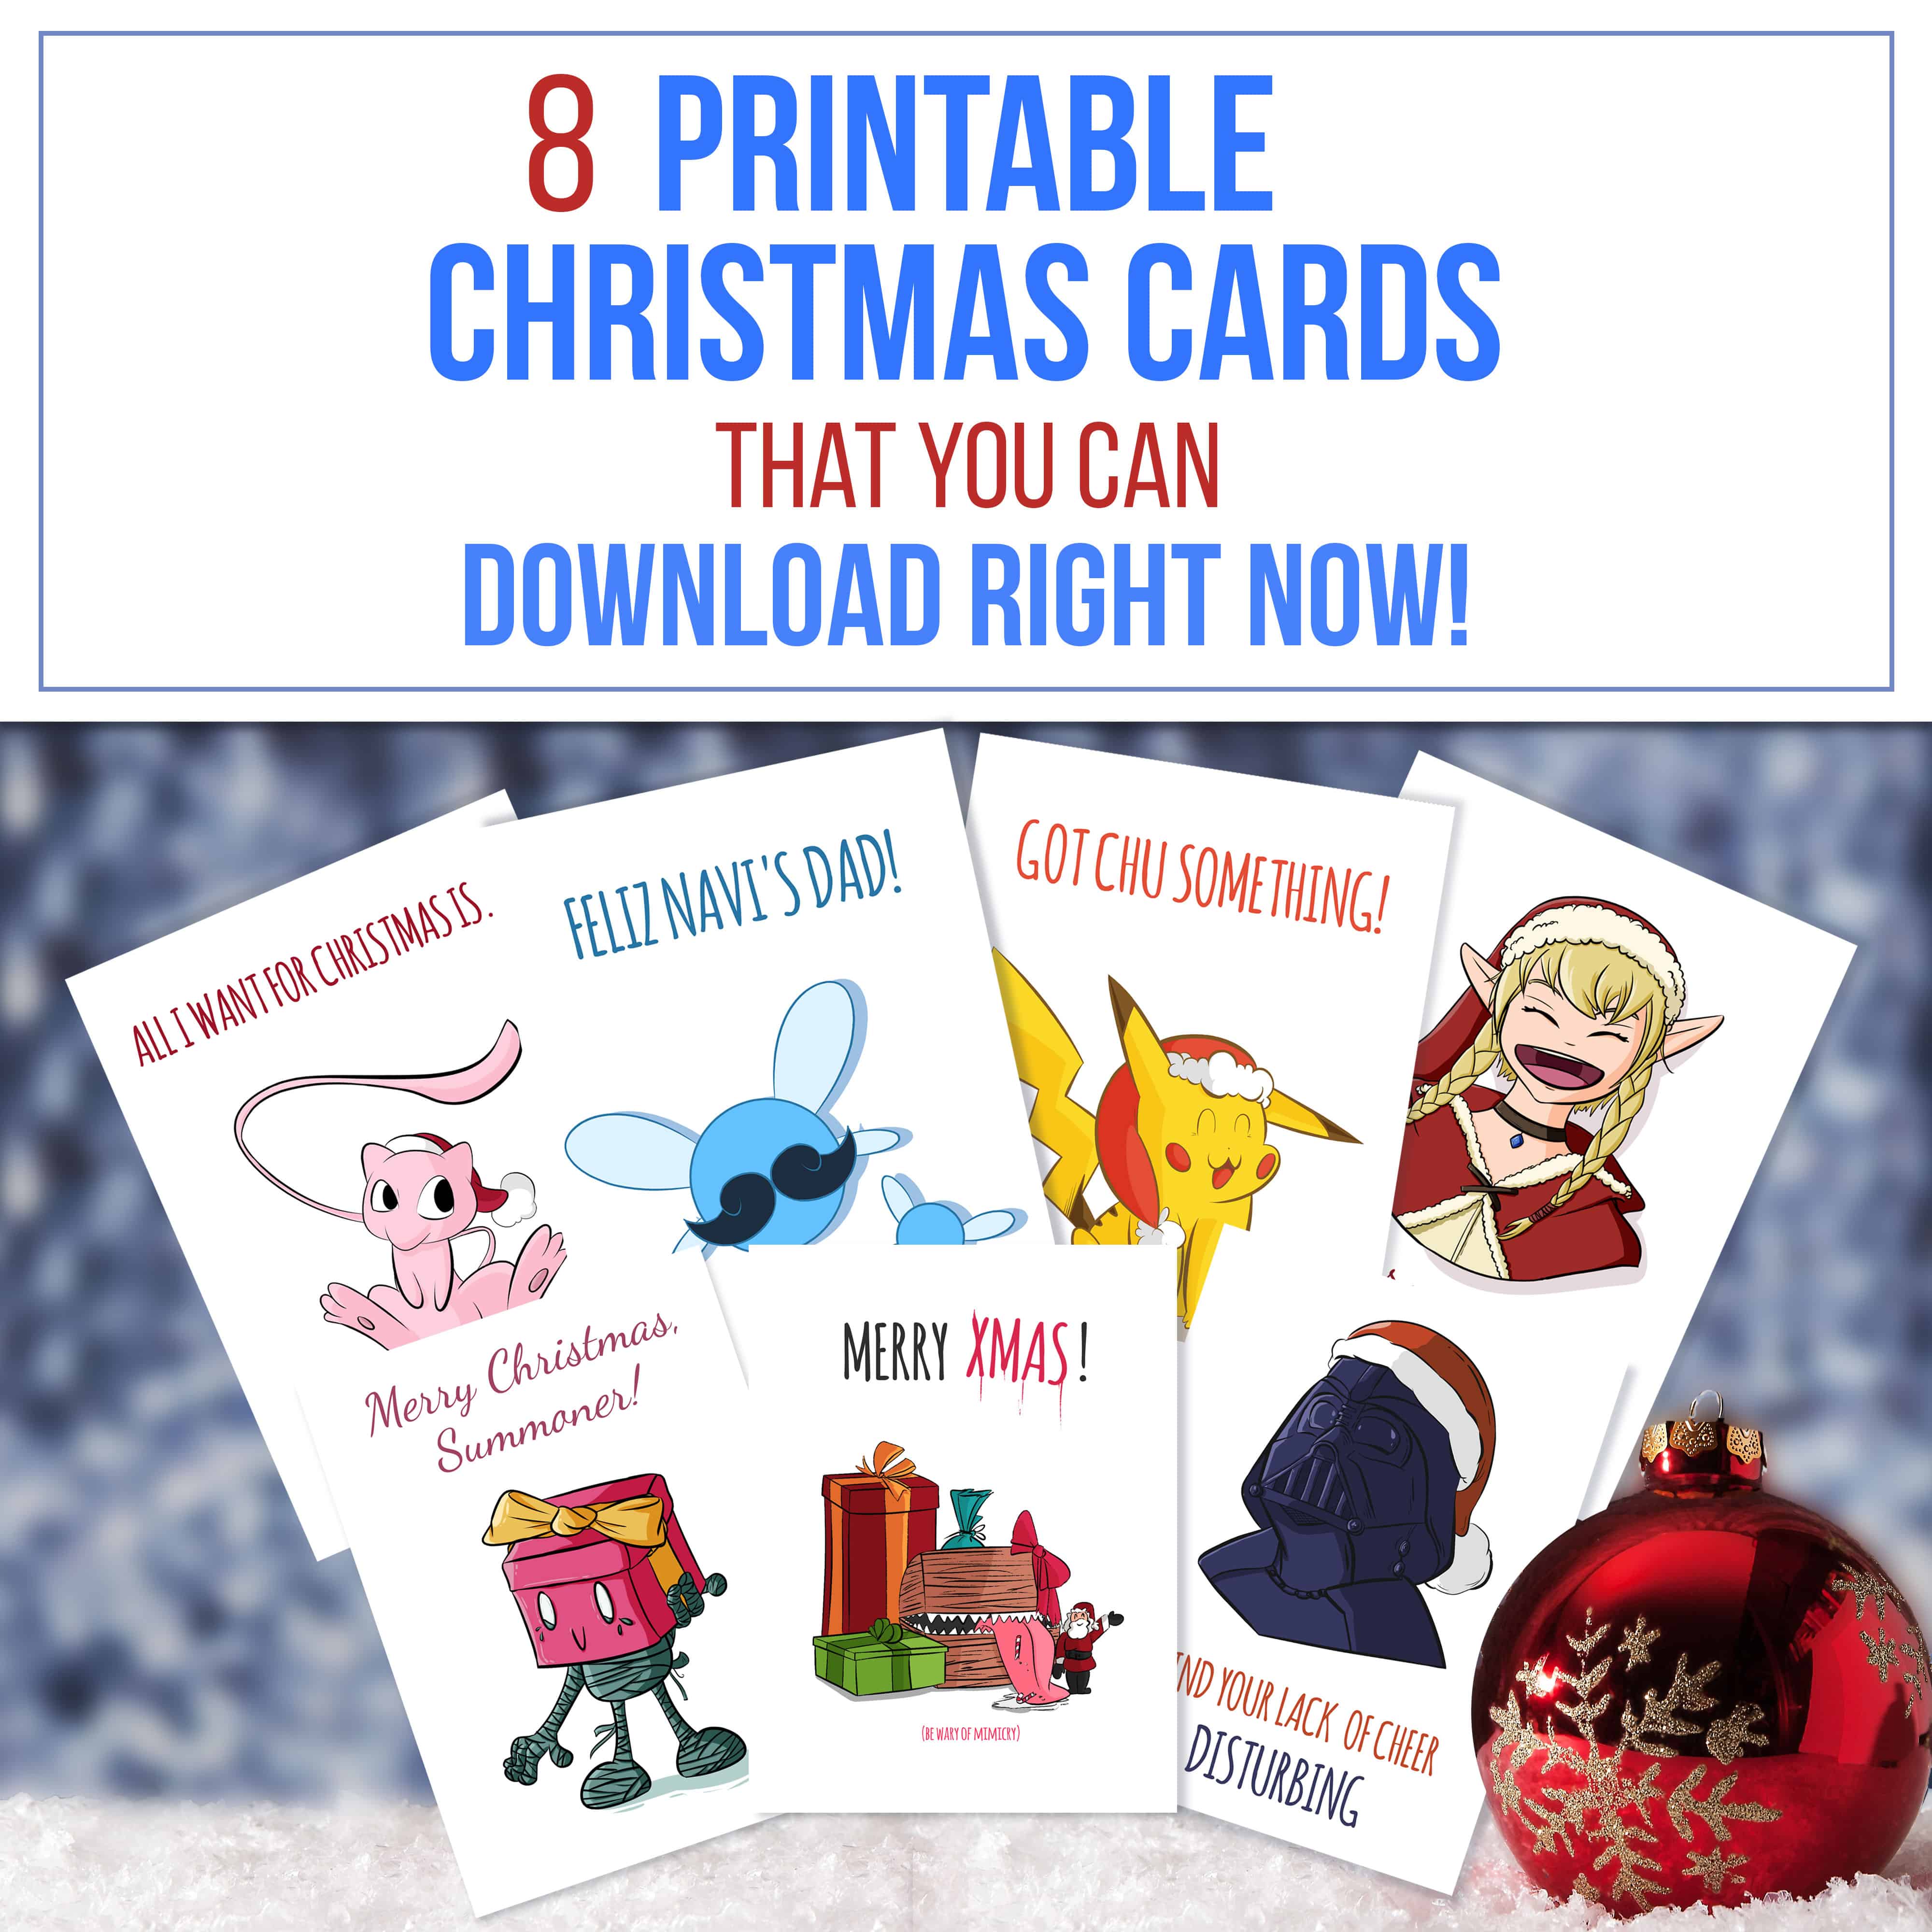 8 Printable Christmas Cards That You Can Download Right NOW!